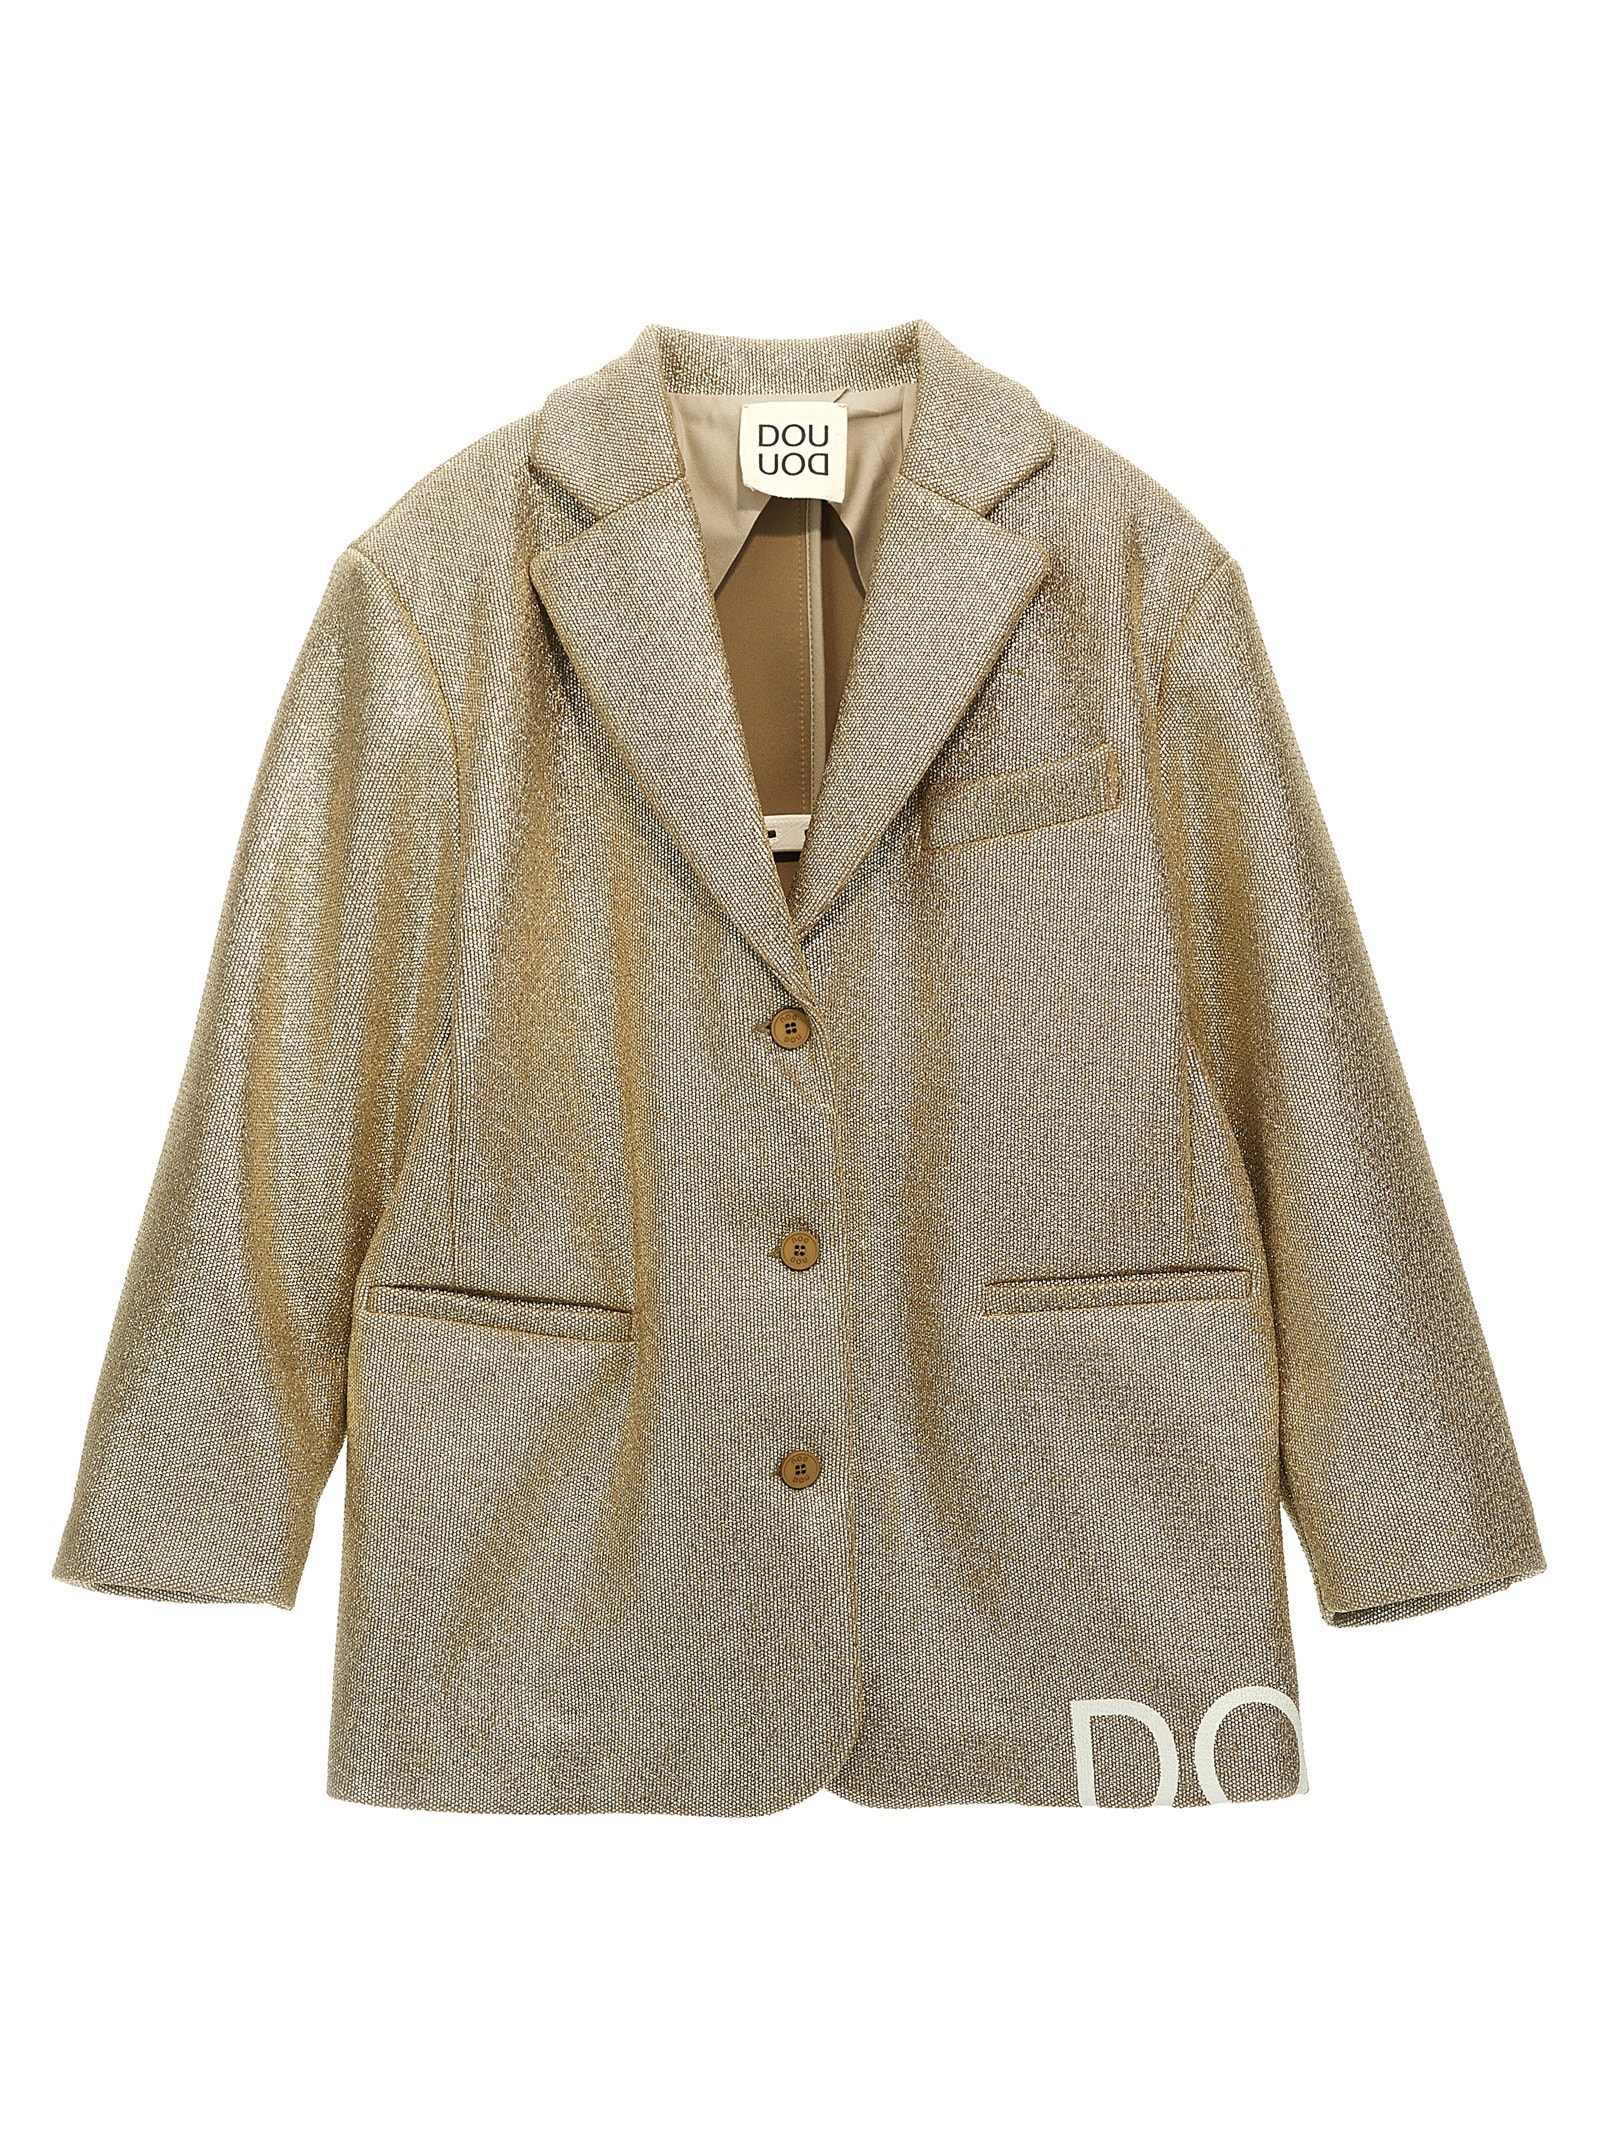 Douuod Kids' Laminated Single-breasted Blazer In Gold